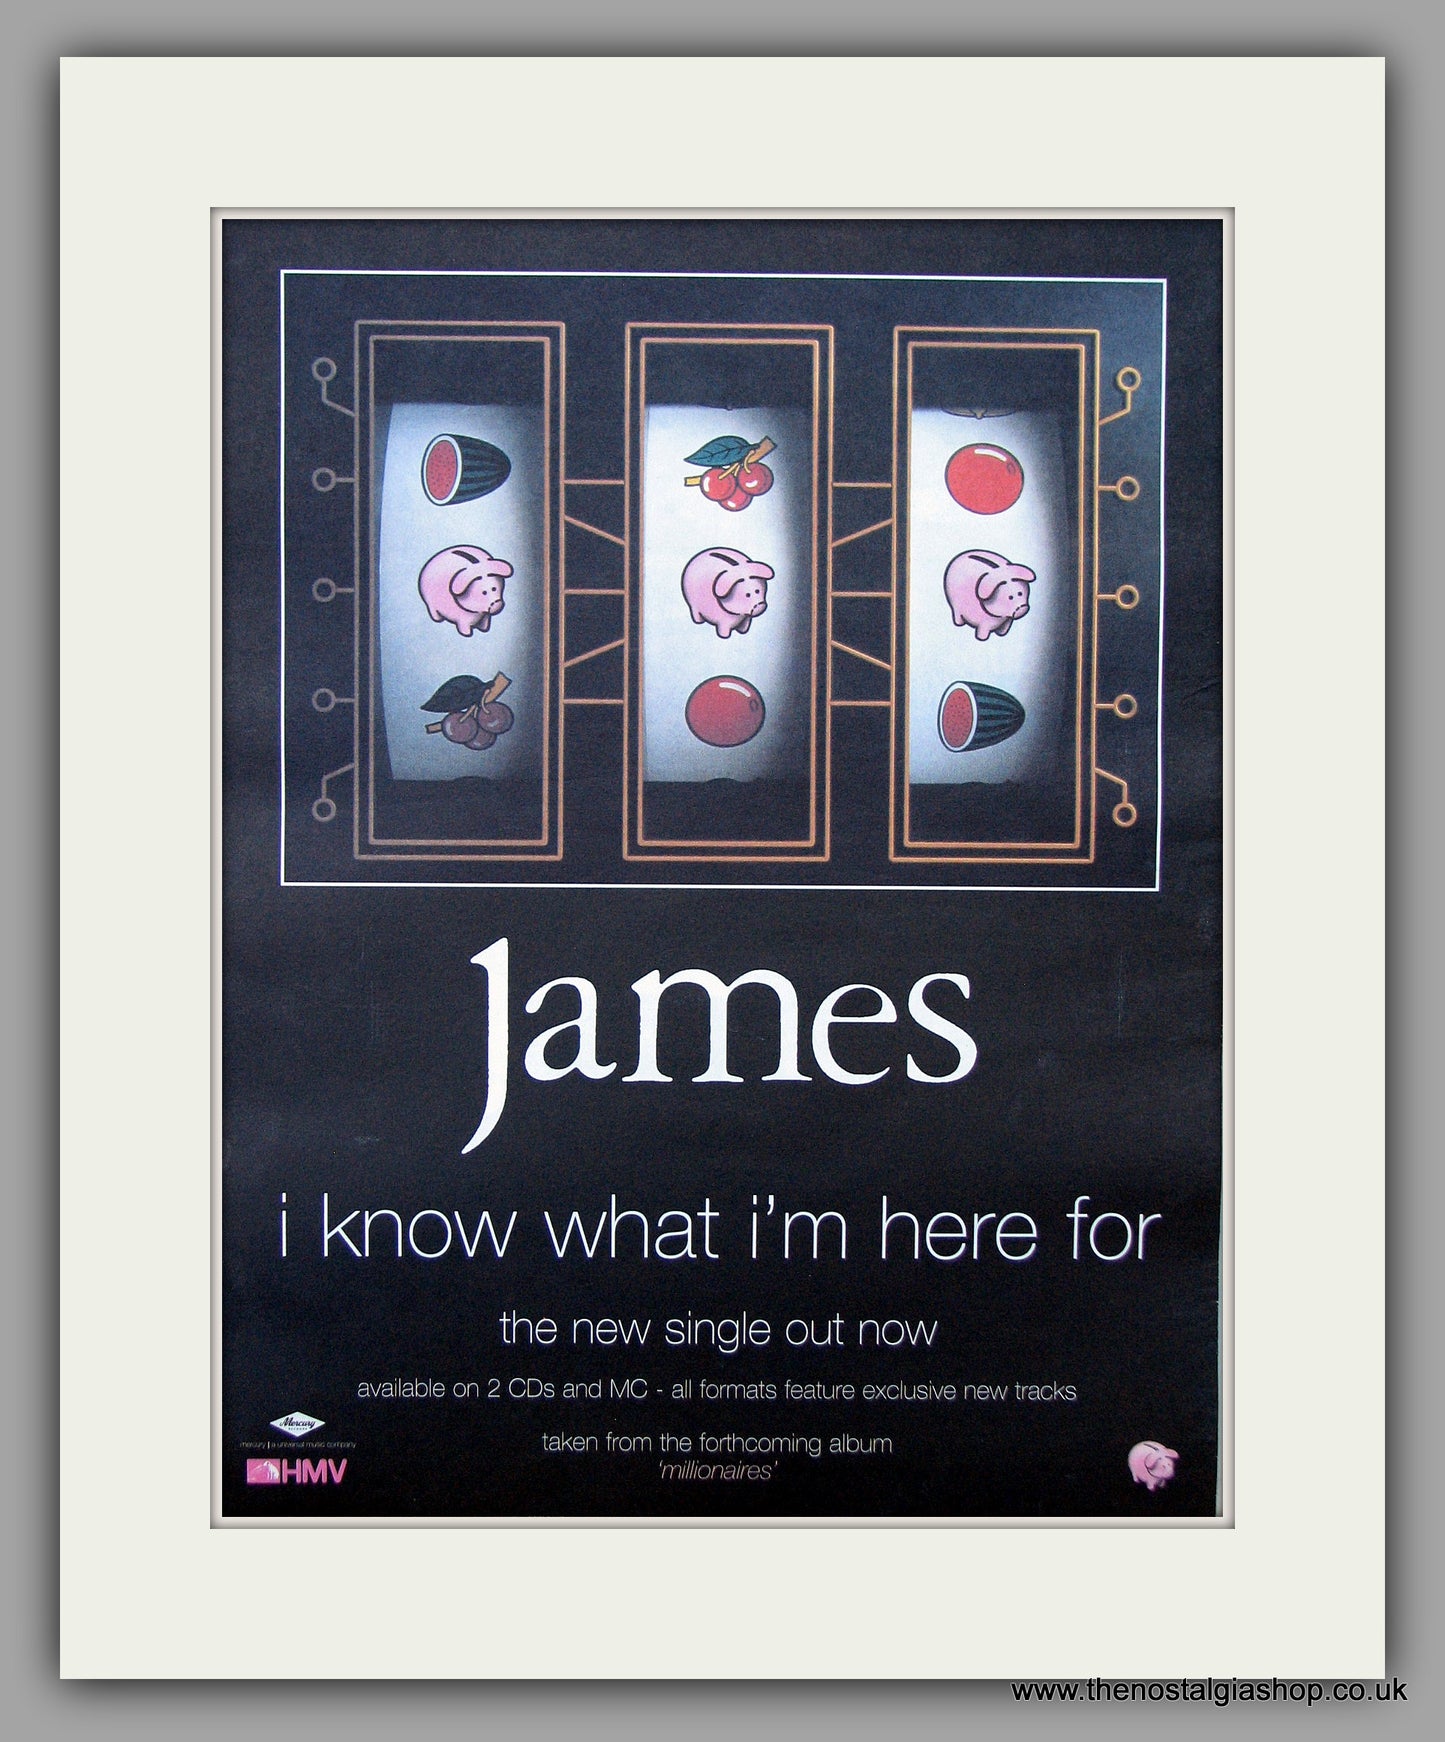 James - I Know What I'm Here For. Original Vintage Advert 1999 (ref AD10833)